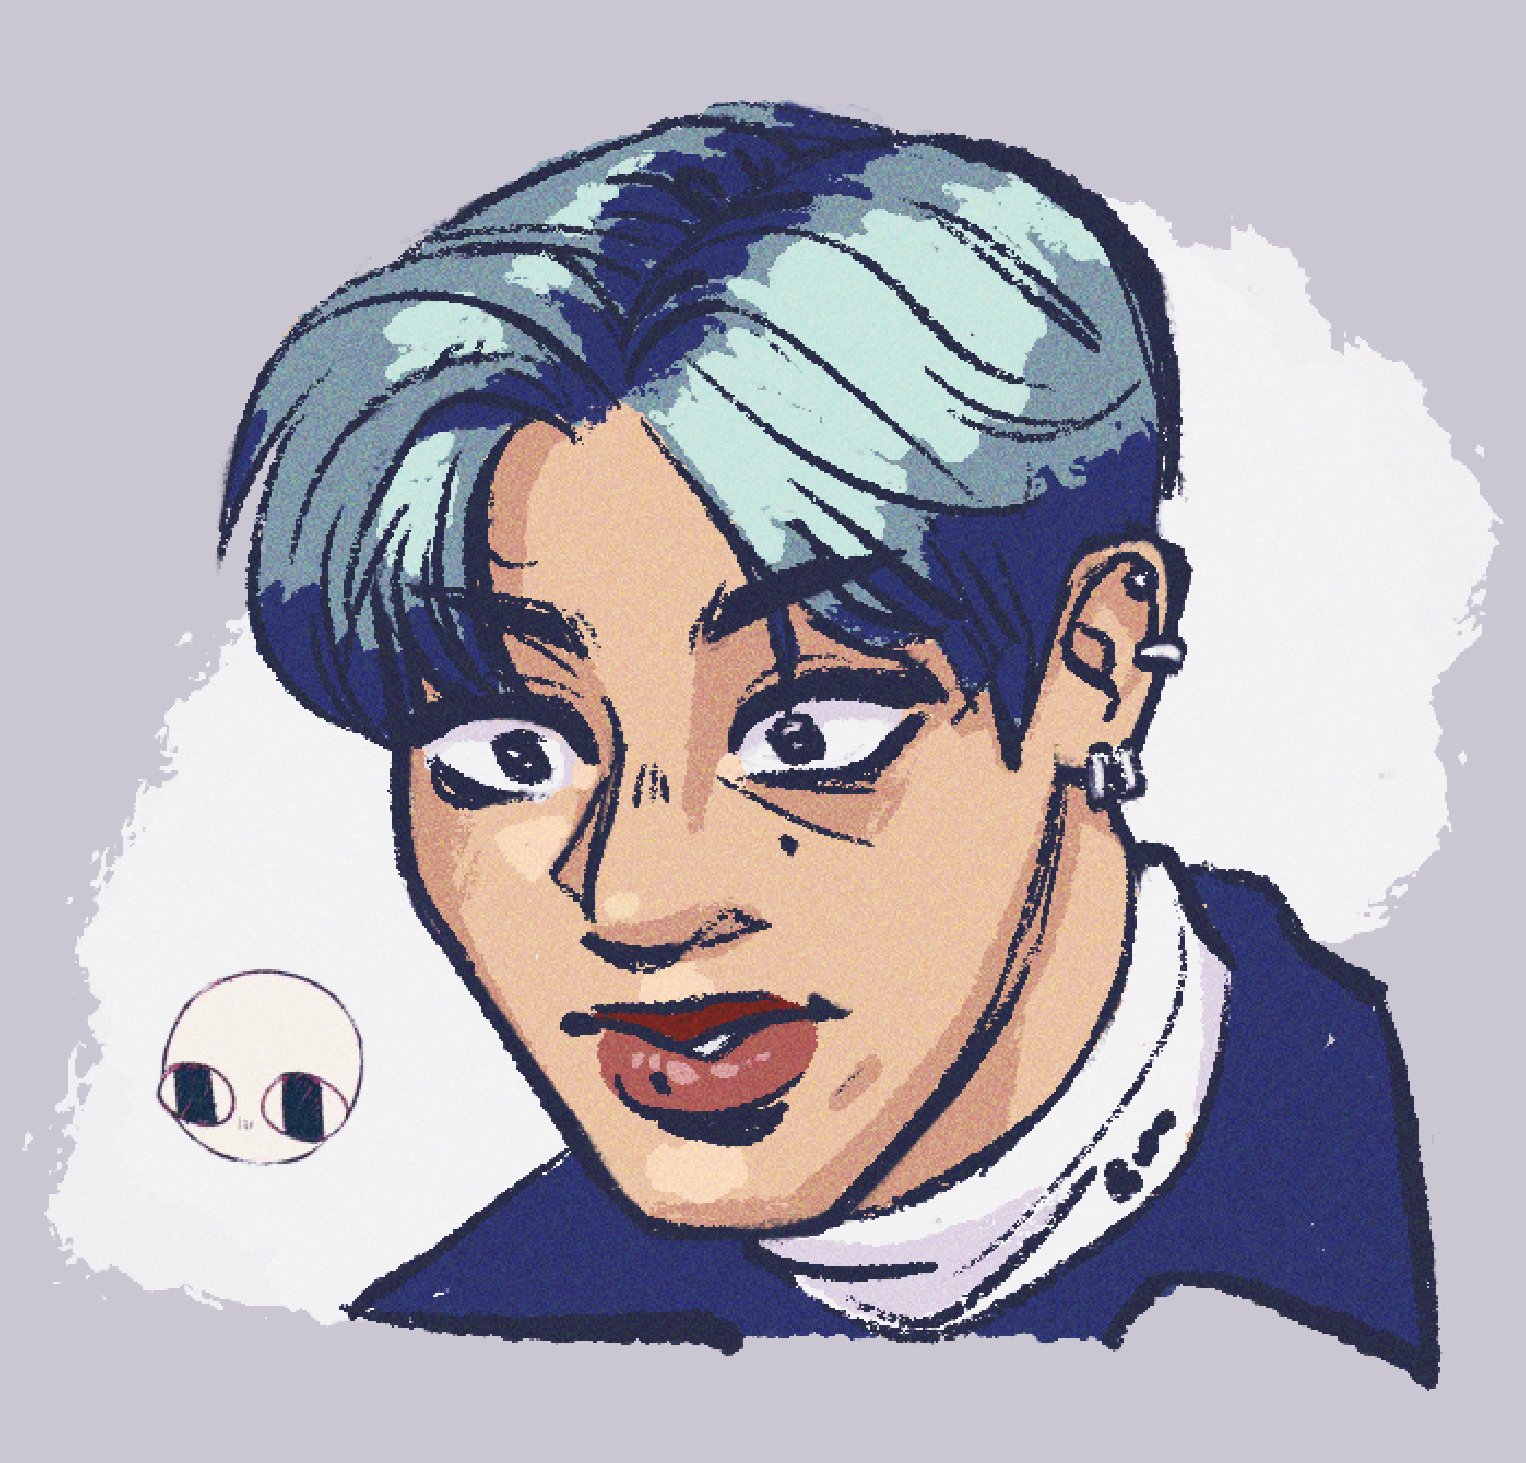 Art of Jung Wooyoung from ATEEZ. A bust drawing of him staring wide-eyed, shocked and/or disturbed.